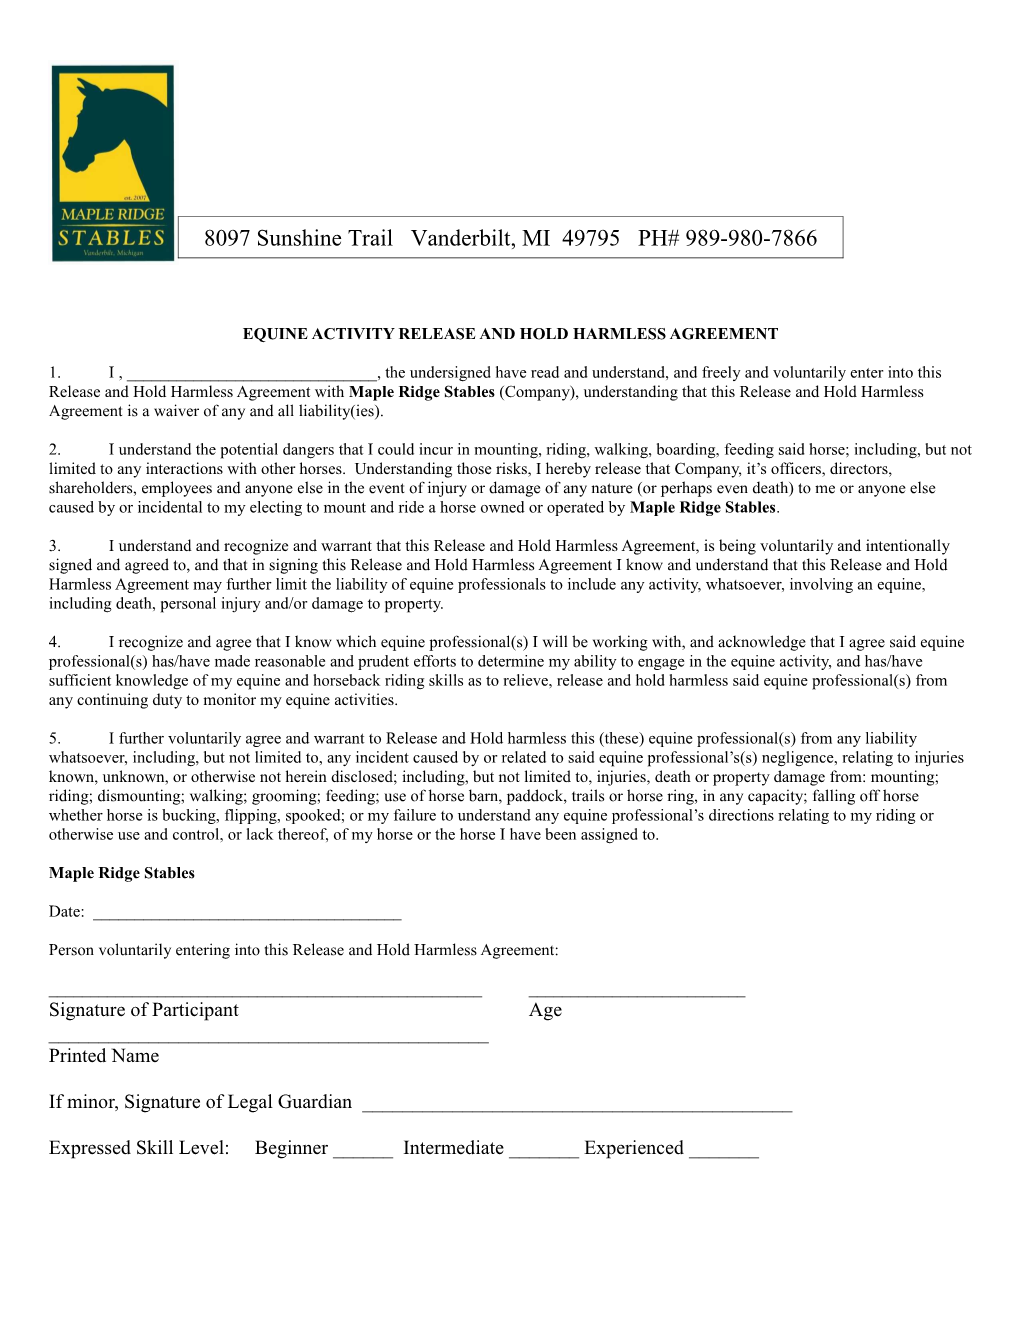 Equine Activity Release and Hold Harmless Agreement